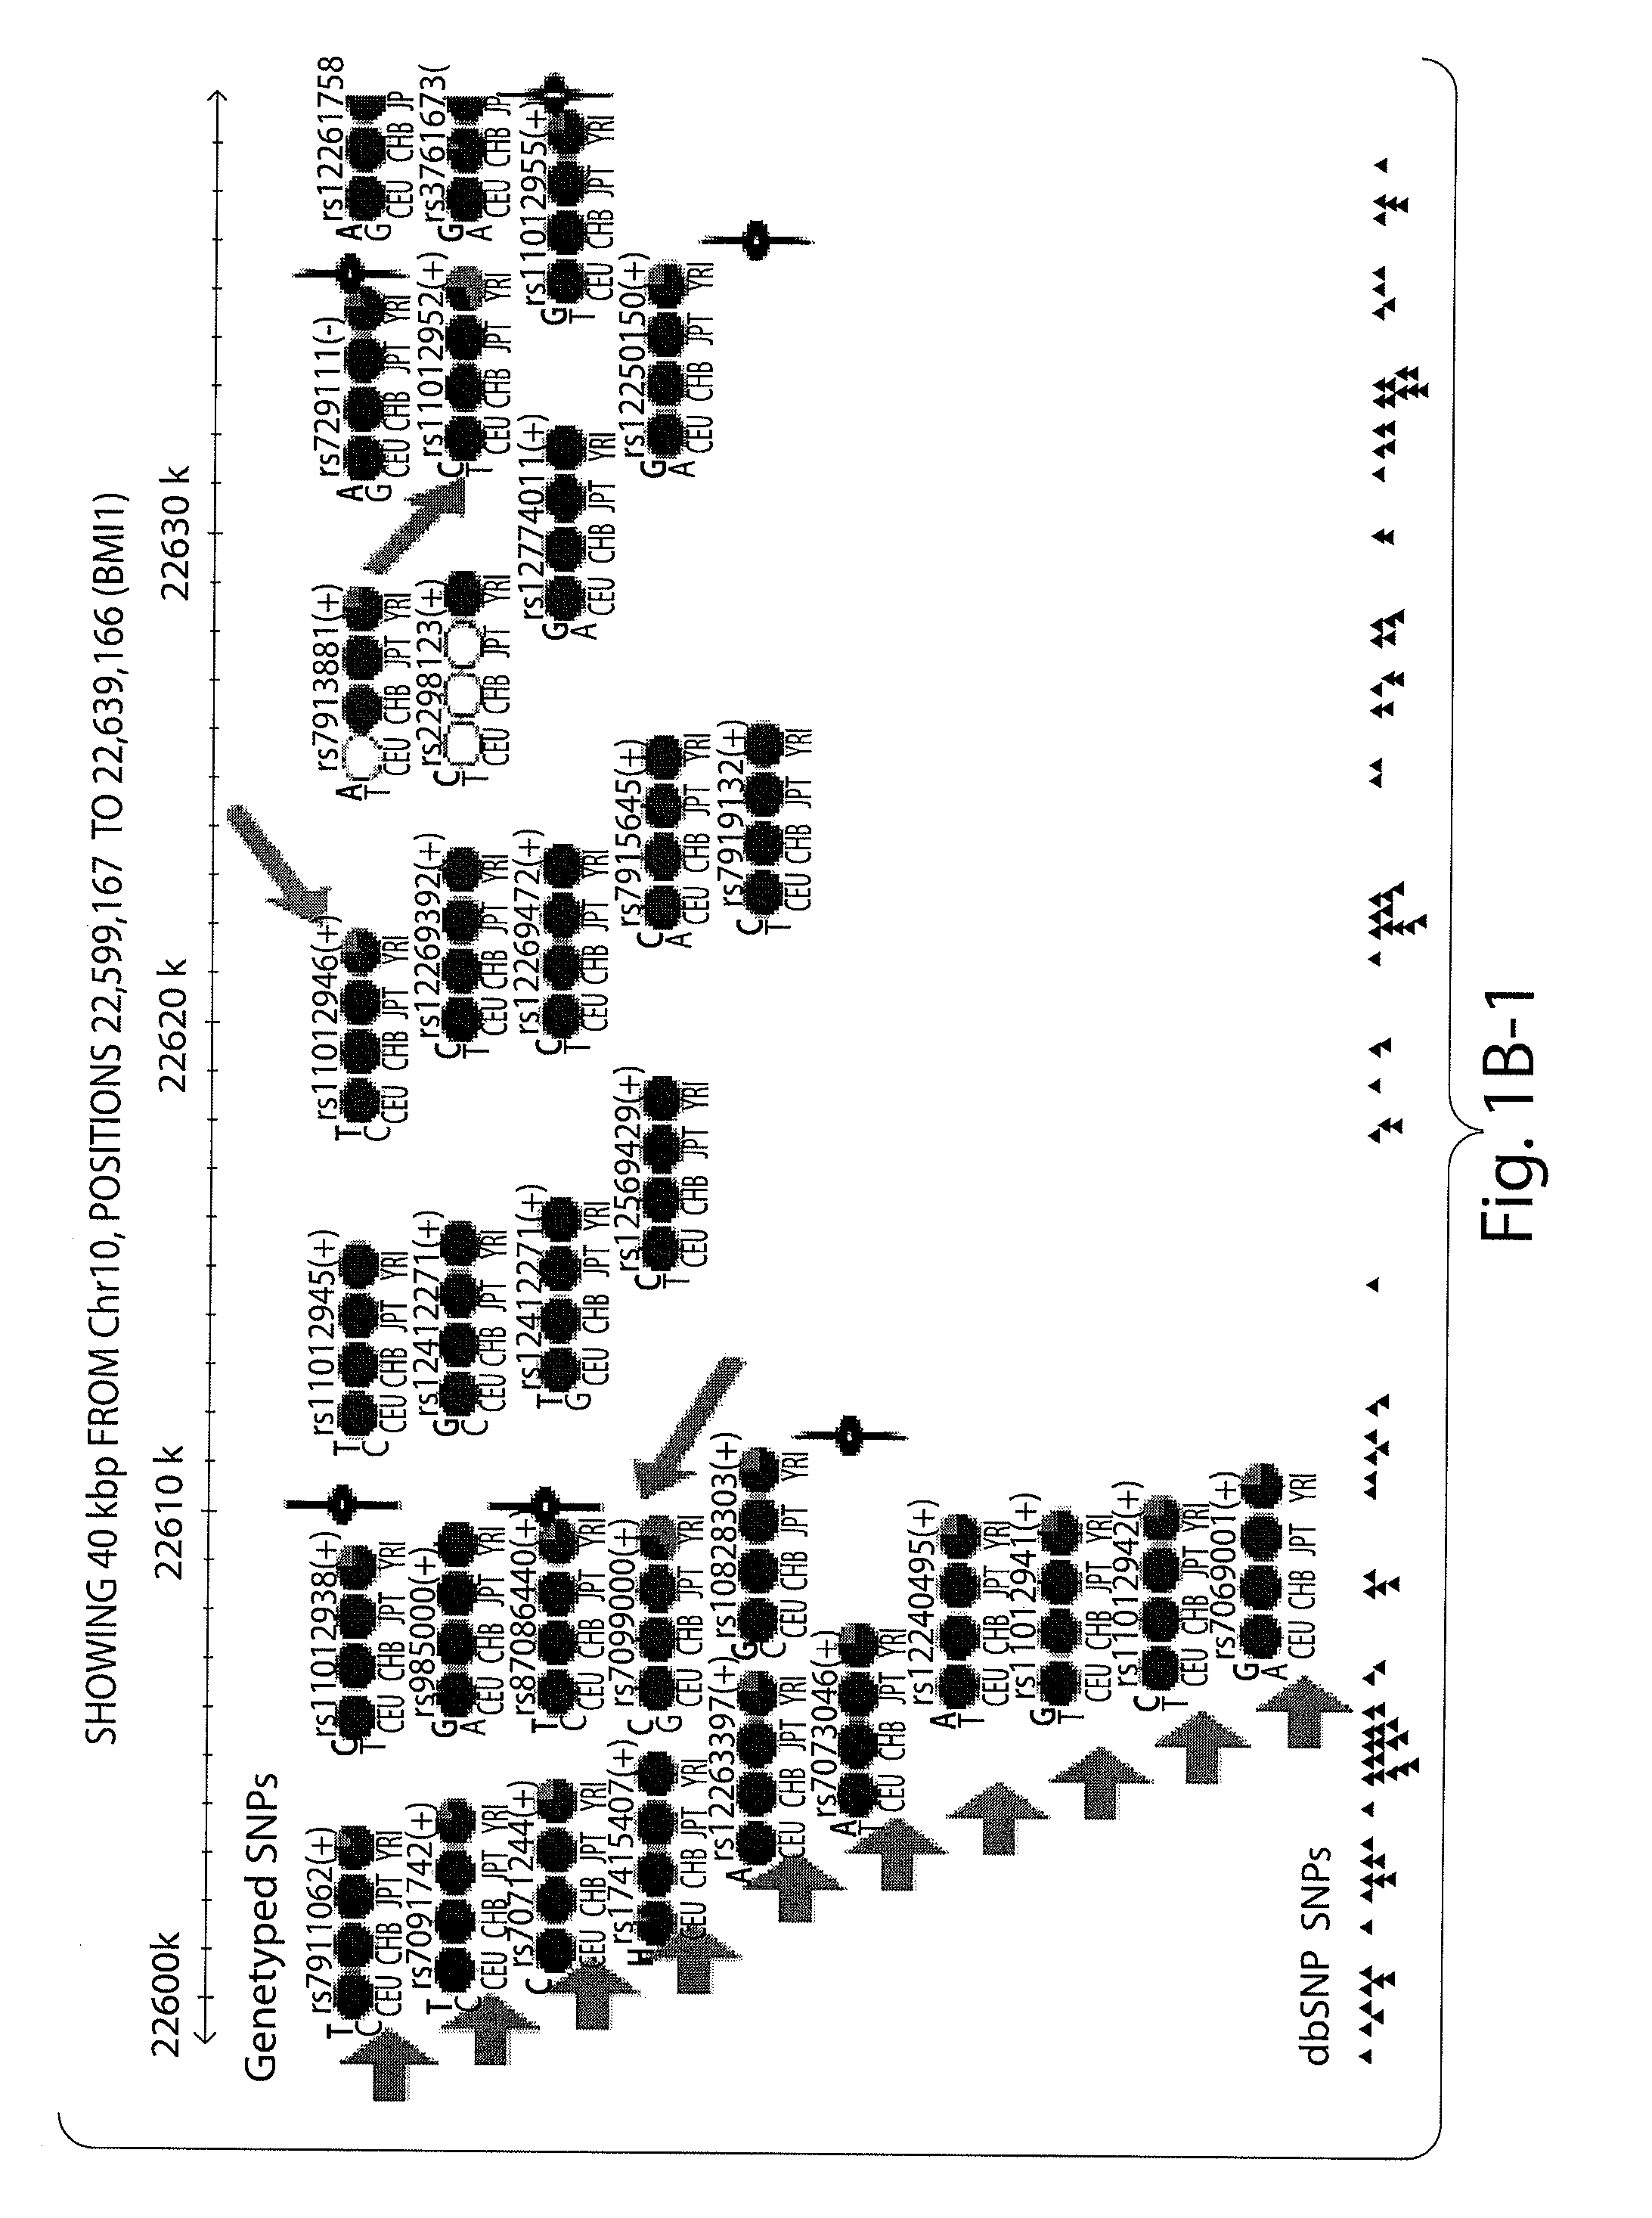 Prognostic and diagnostic method for cancer therapy